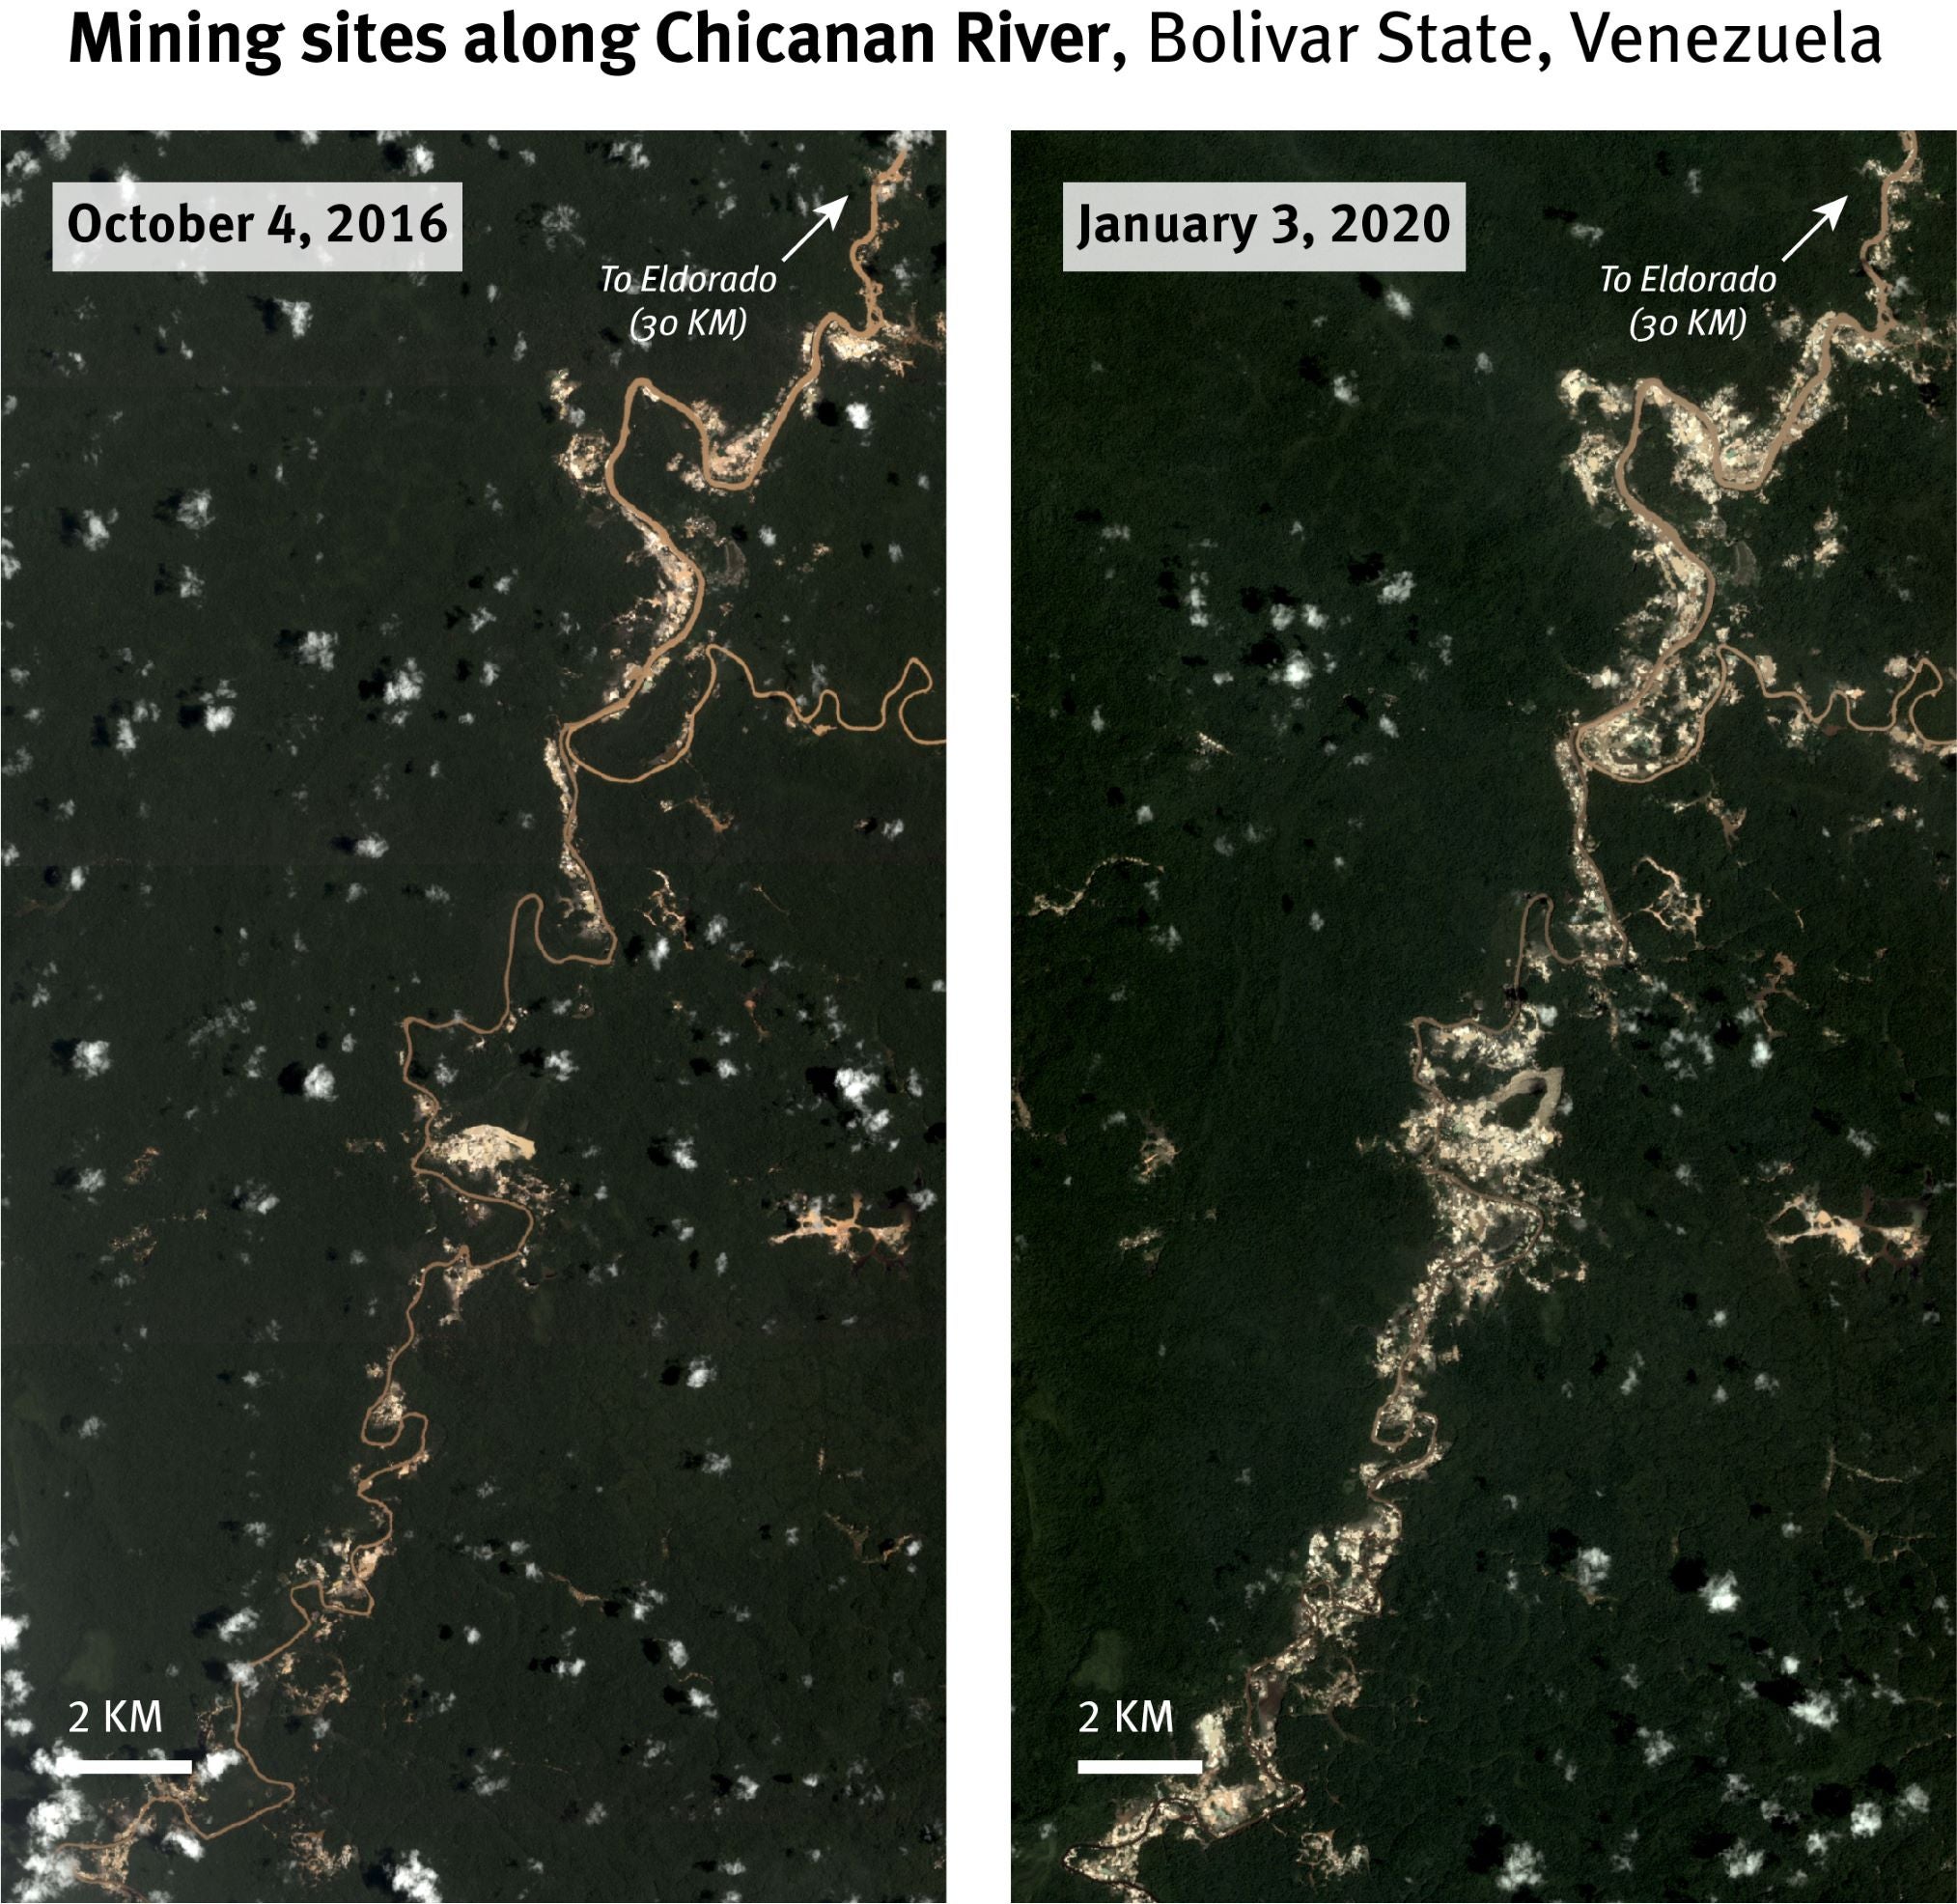 Satellite imagery show a significant increase in the number and expansion of mining sites along Chicanan River in Bolivar State, Venezuela, since 2016.